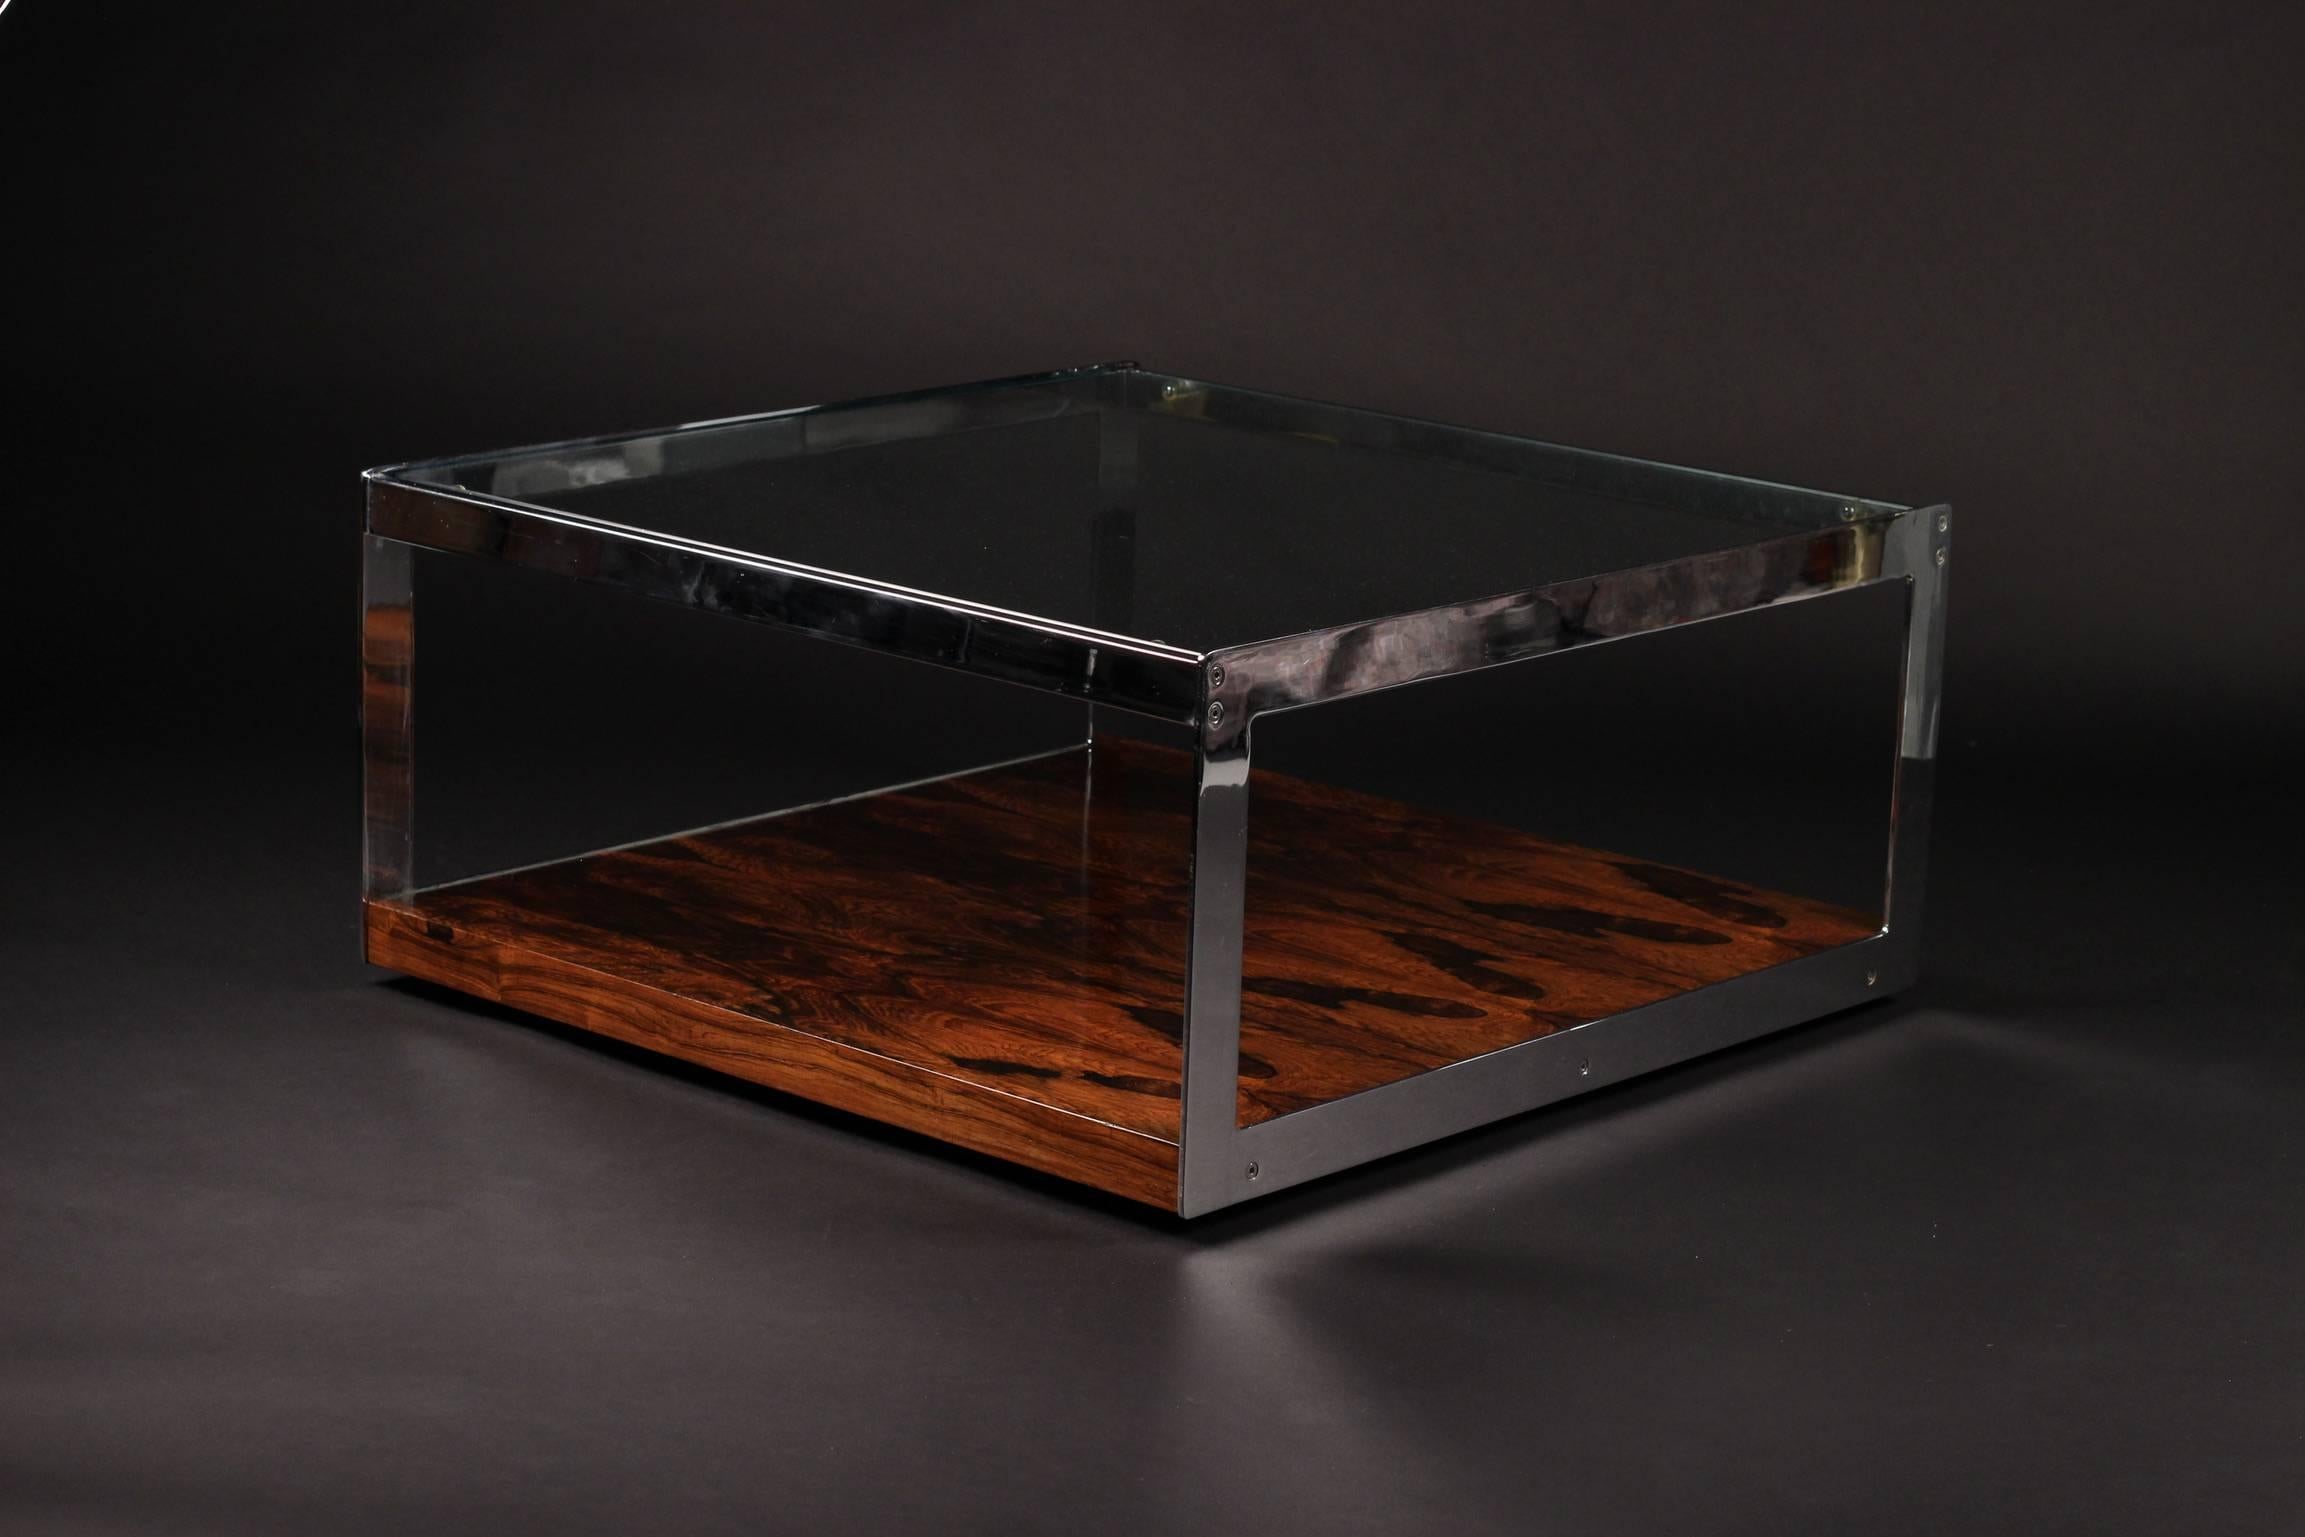 Late 20th Century Scandinavian Modern Style Coffee Table In Chrome, Glass and Rosewood by Merrow 